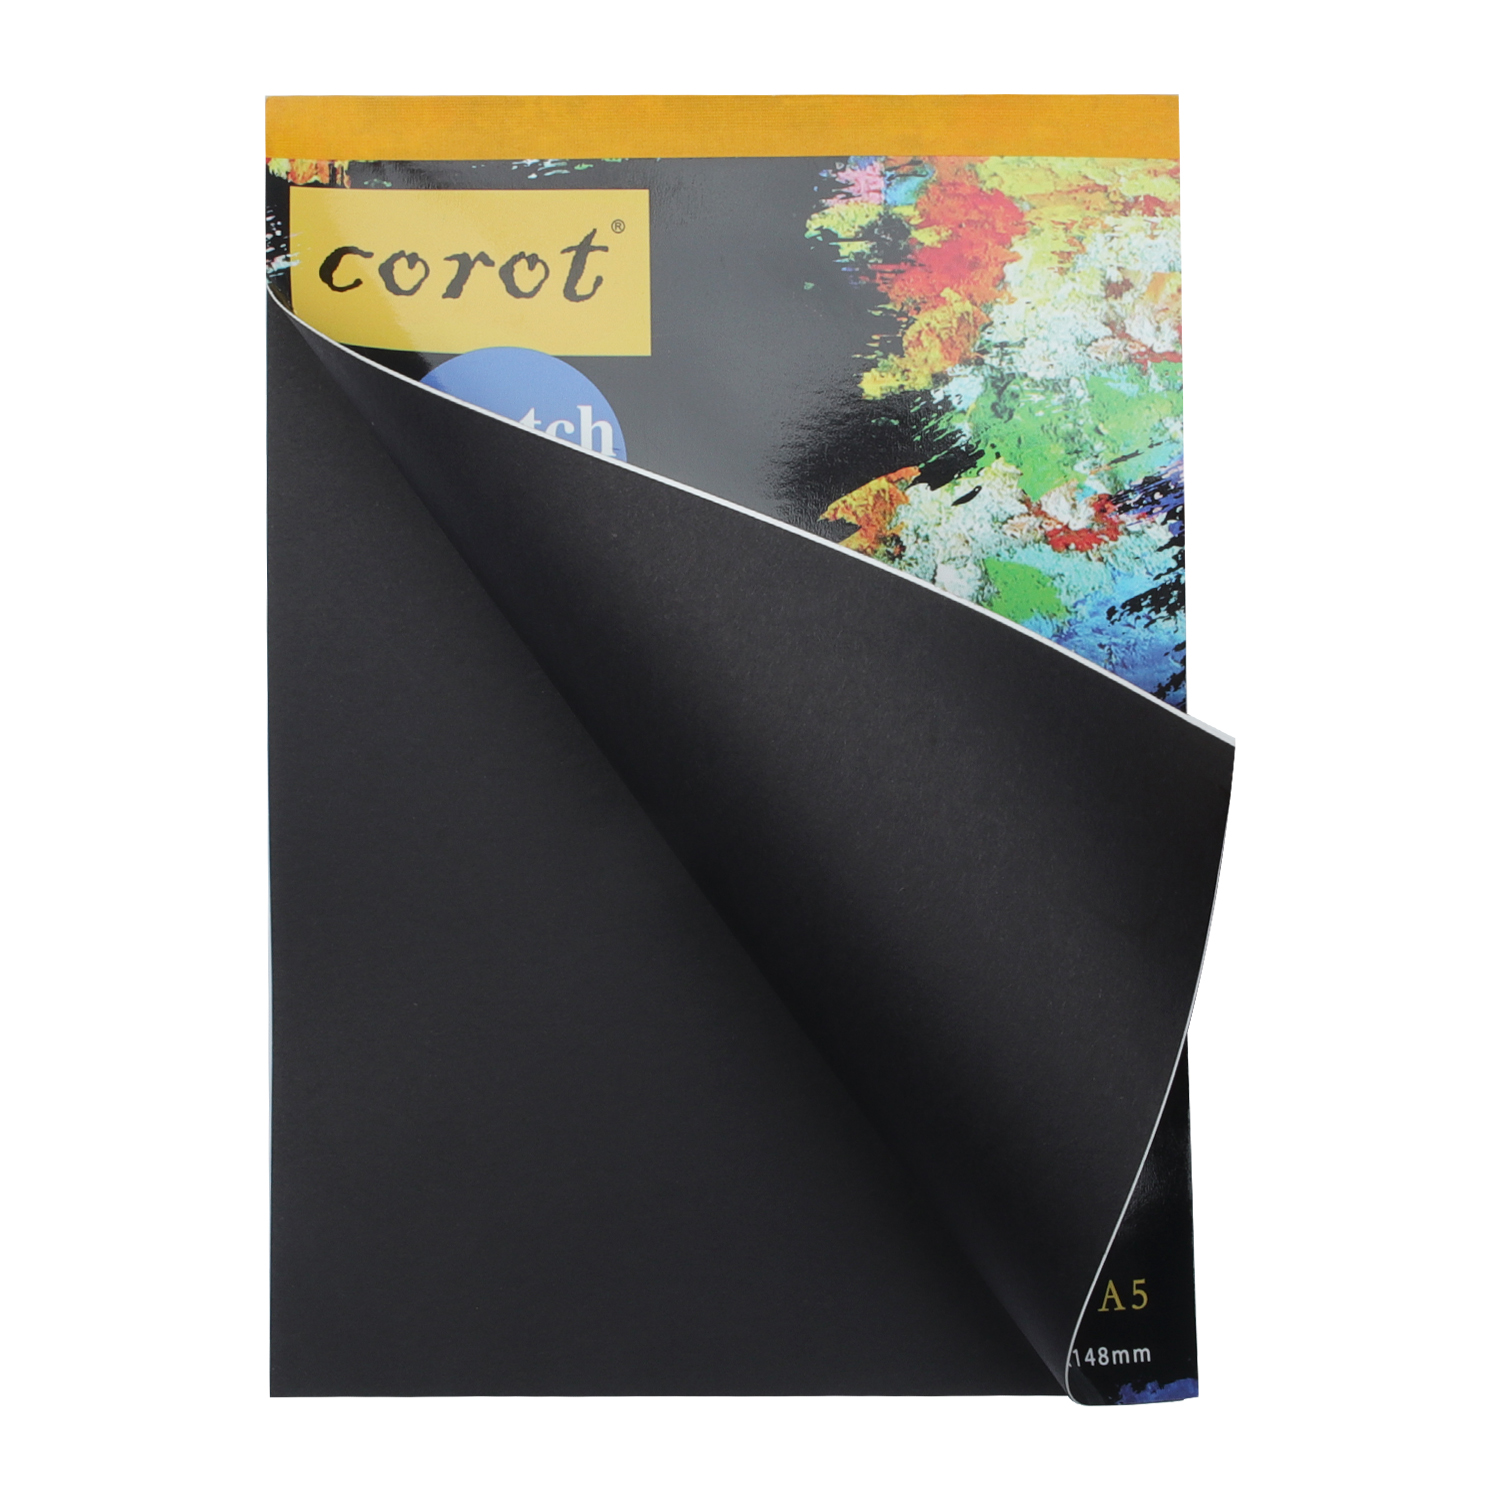 A4/A5 Paper Vintage Black Cardboard Premium Sketch Pad Drawing Book Paper 140GSM/25 Sheets for Pastel/Pencil &amp; Charcoal1